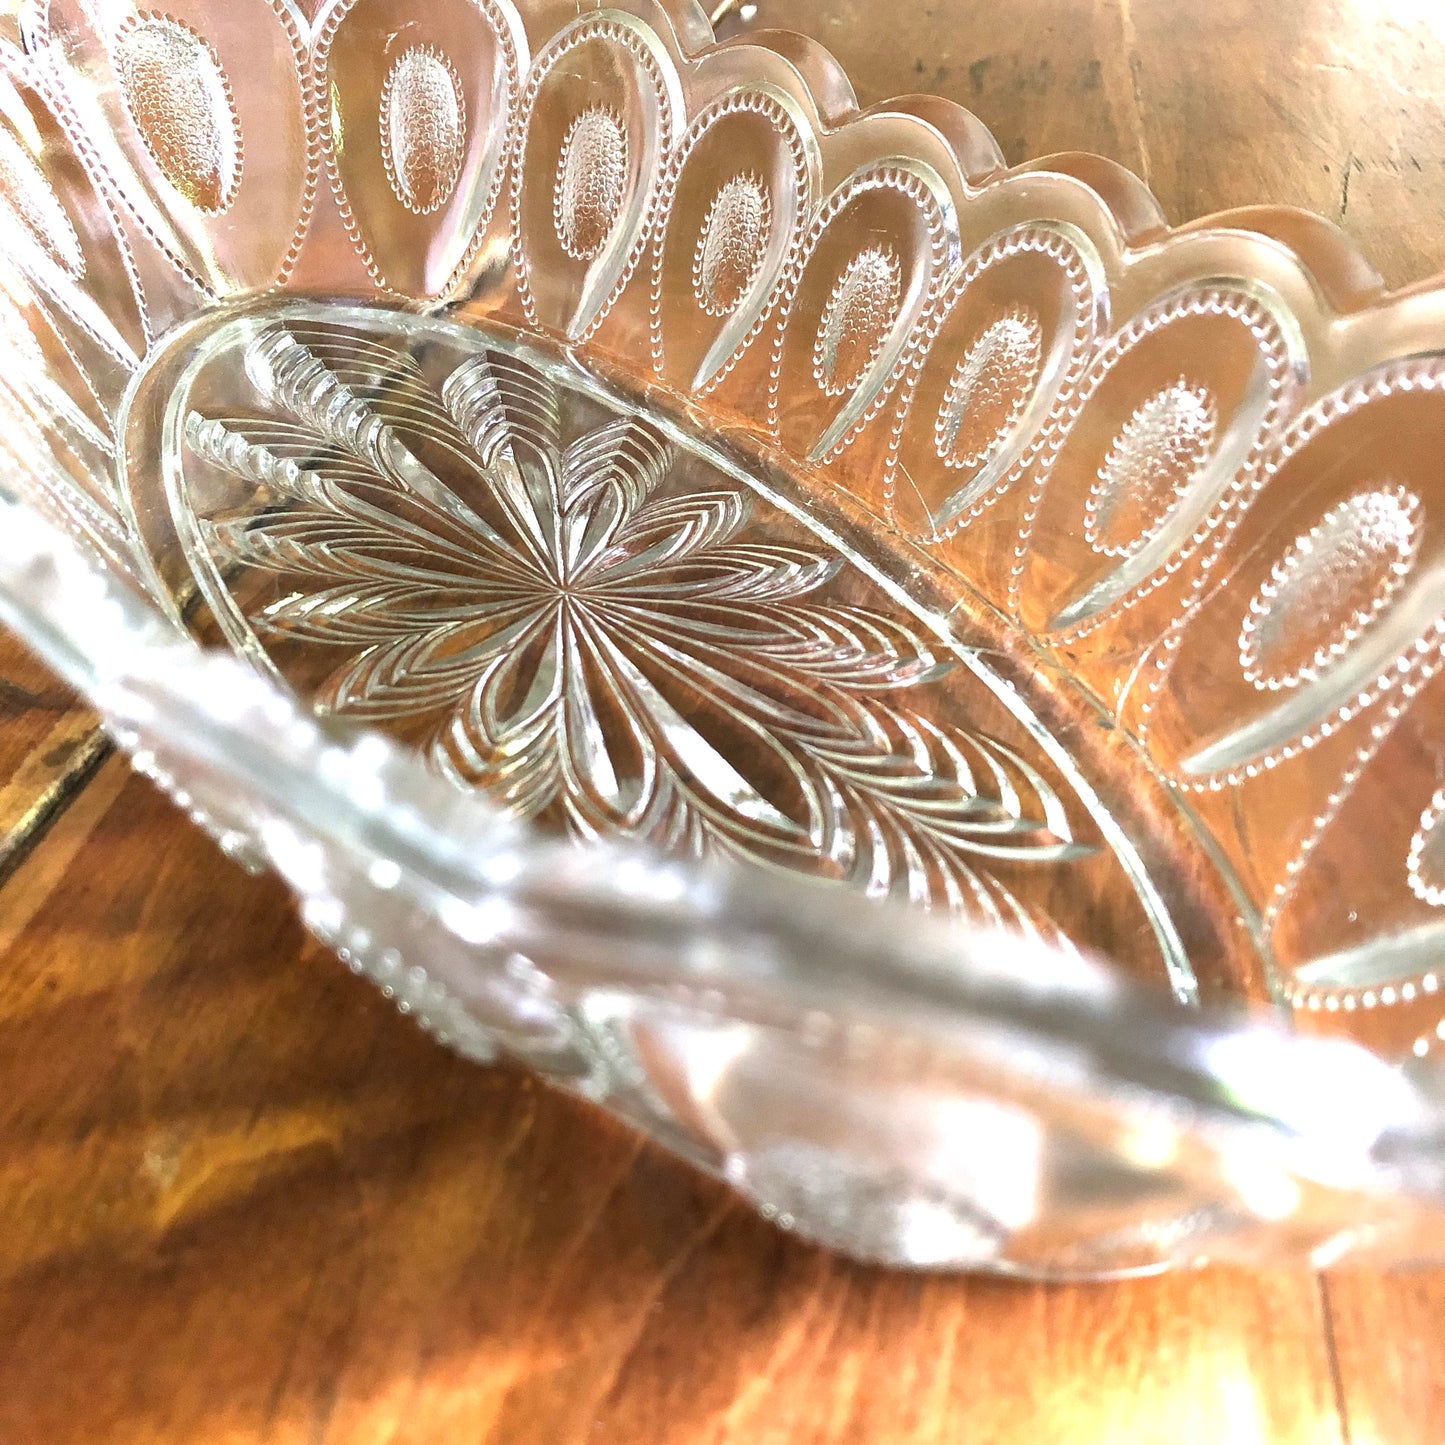 Early Pressed Glass Celery Dish, Peacock Pattern